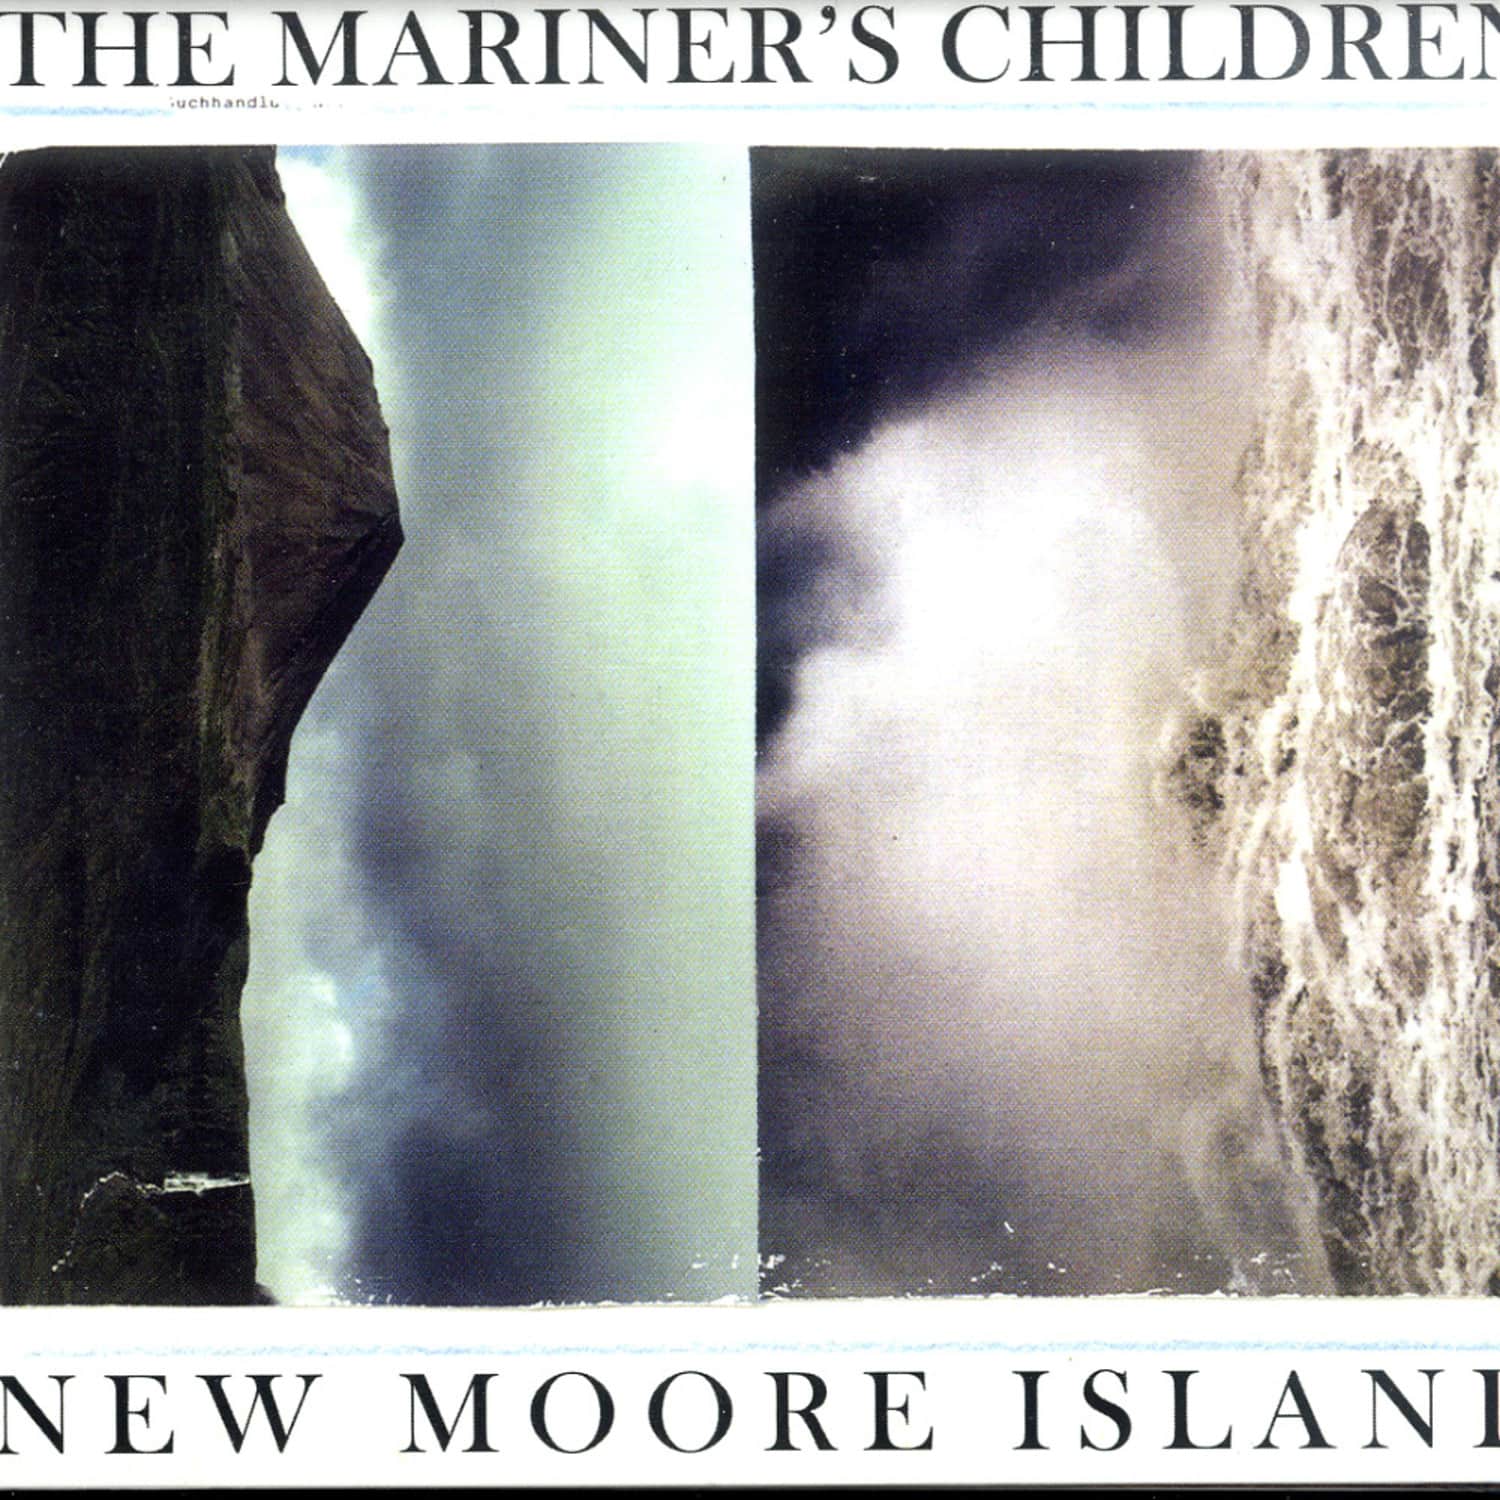 The Mariners - NEW MOORE ISLAND 